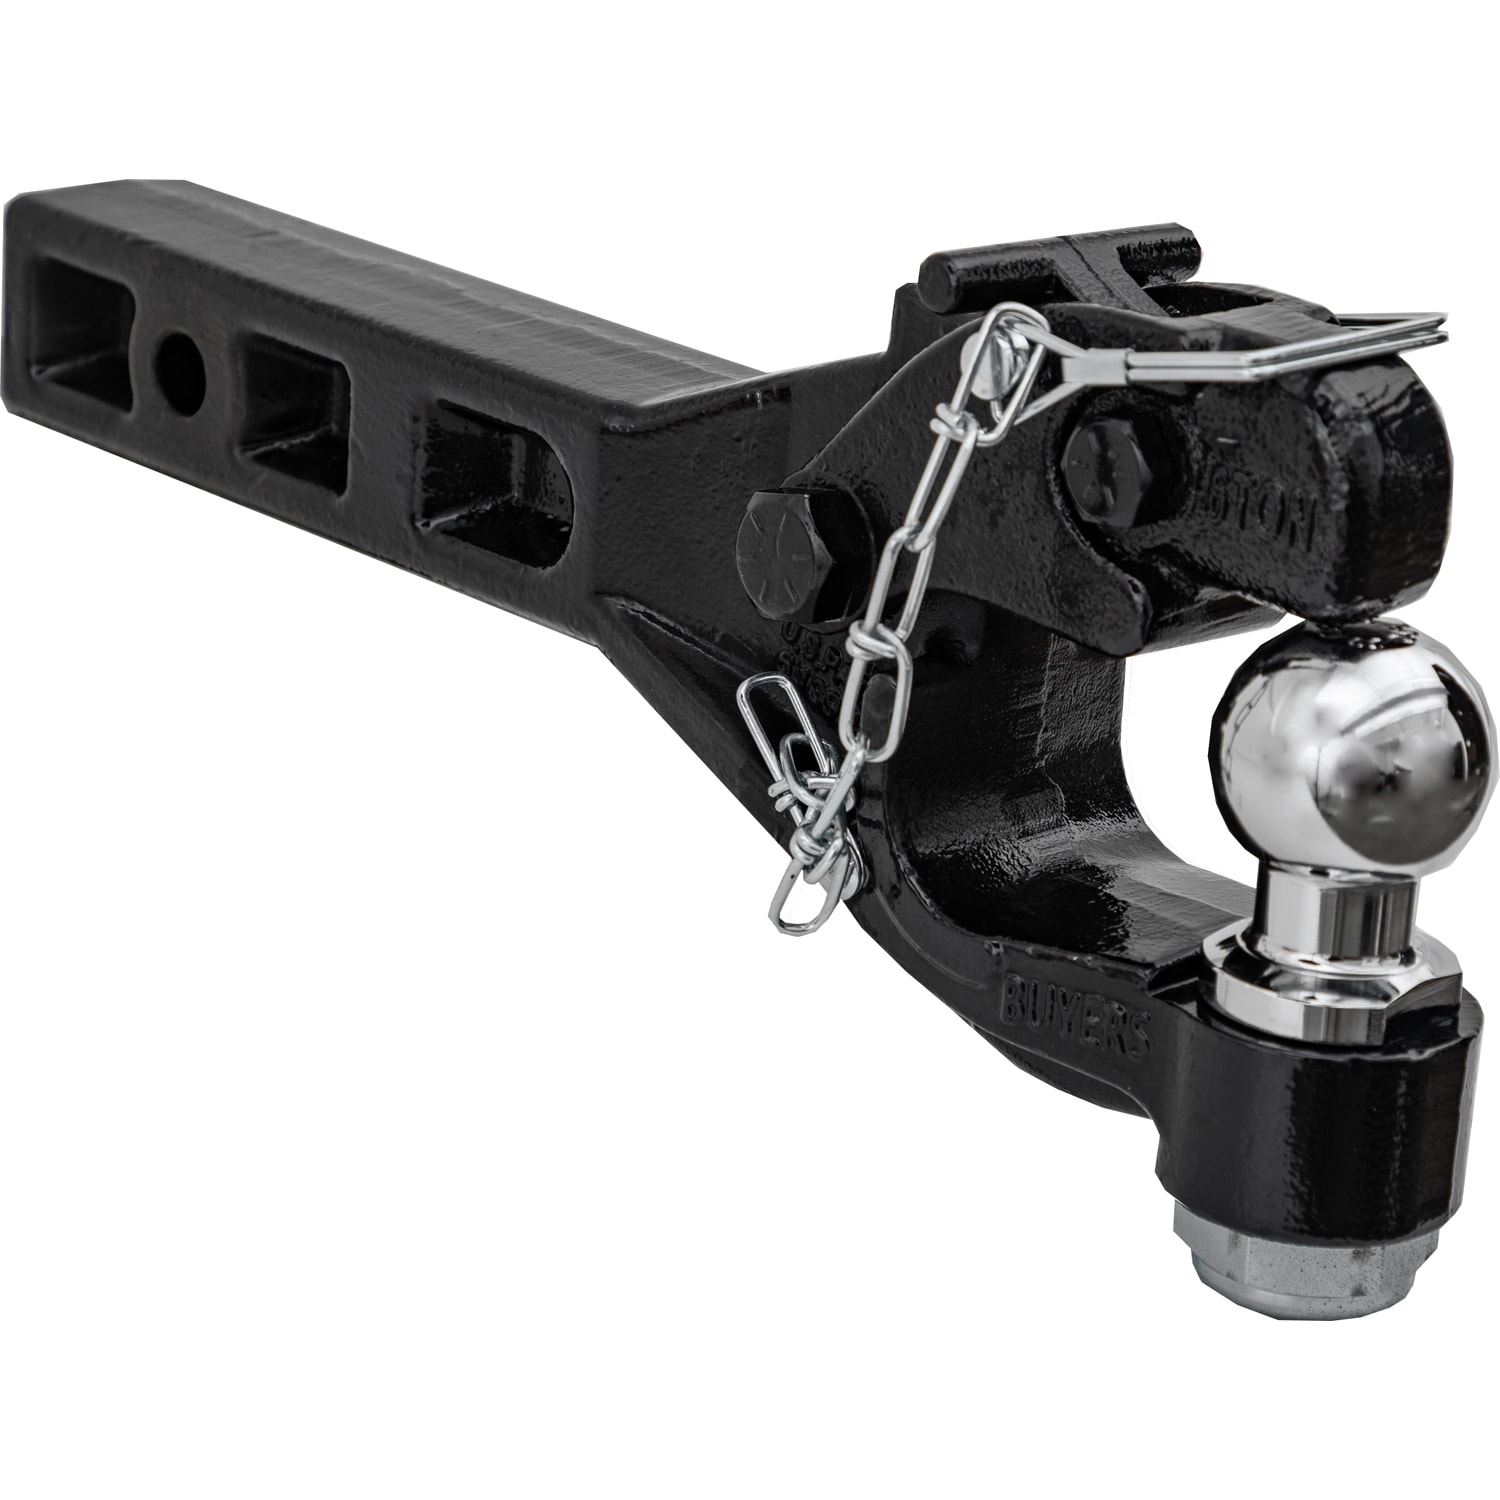 Trailer Hitch Ball Mounts at Lowes.com